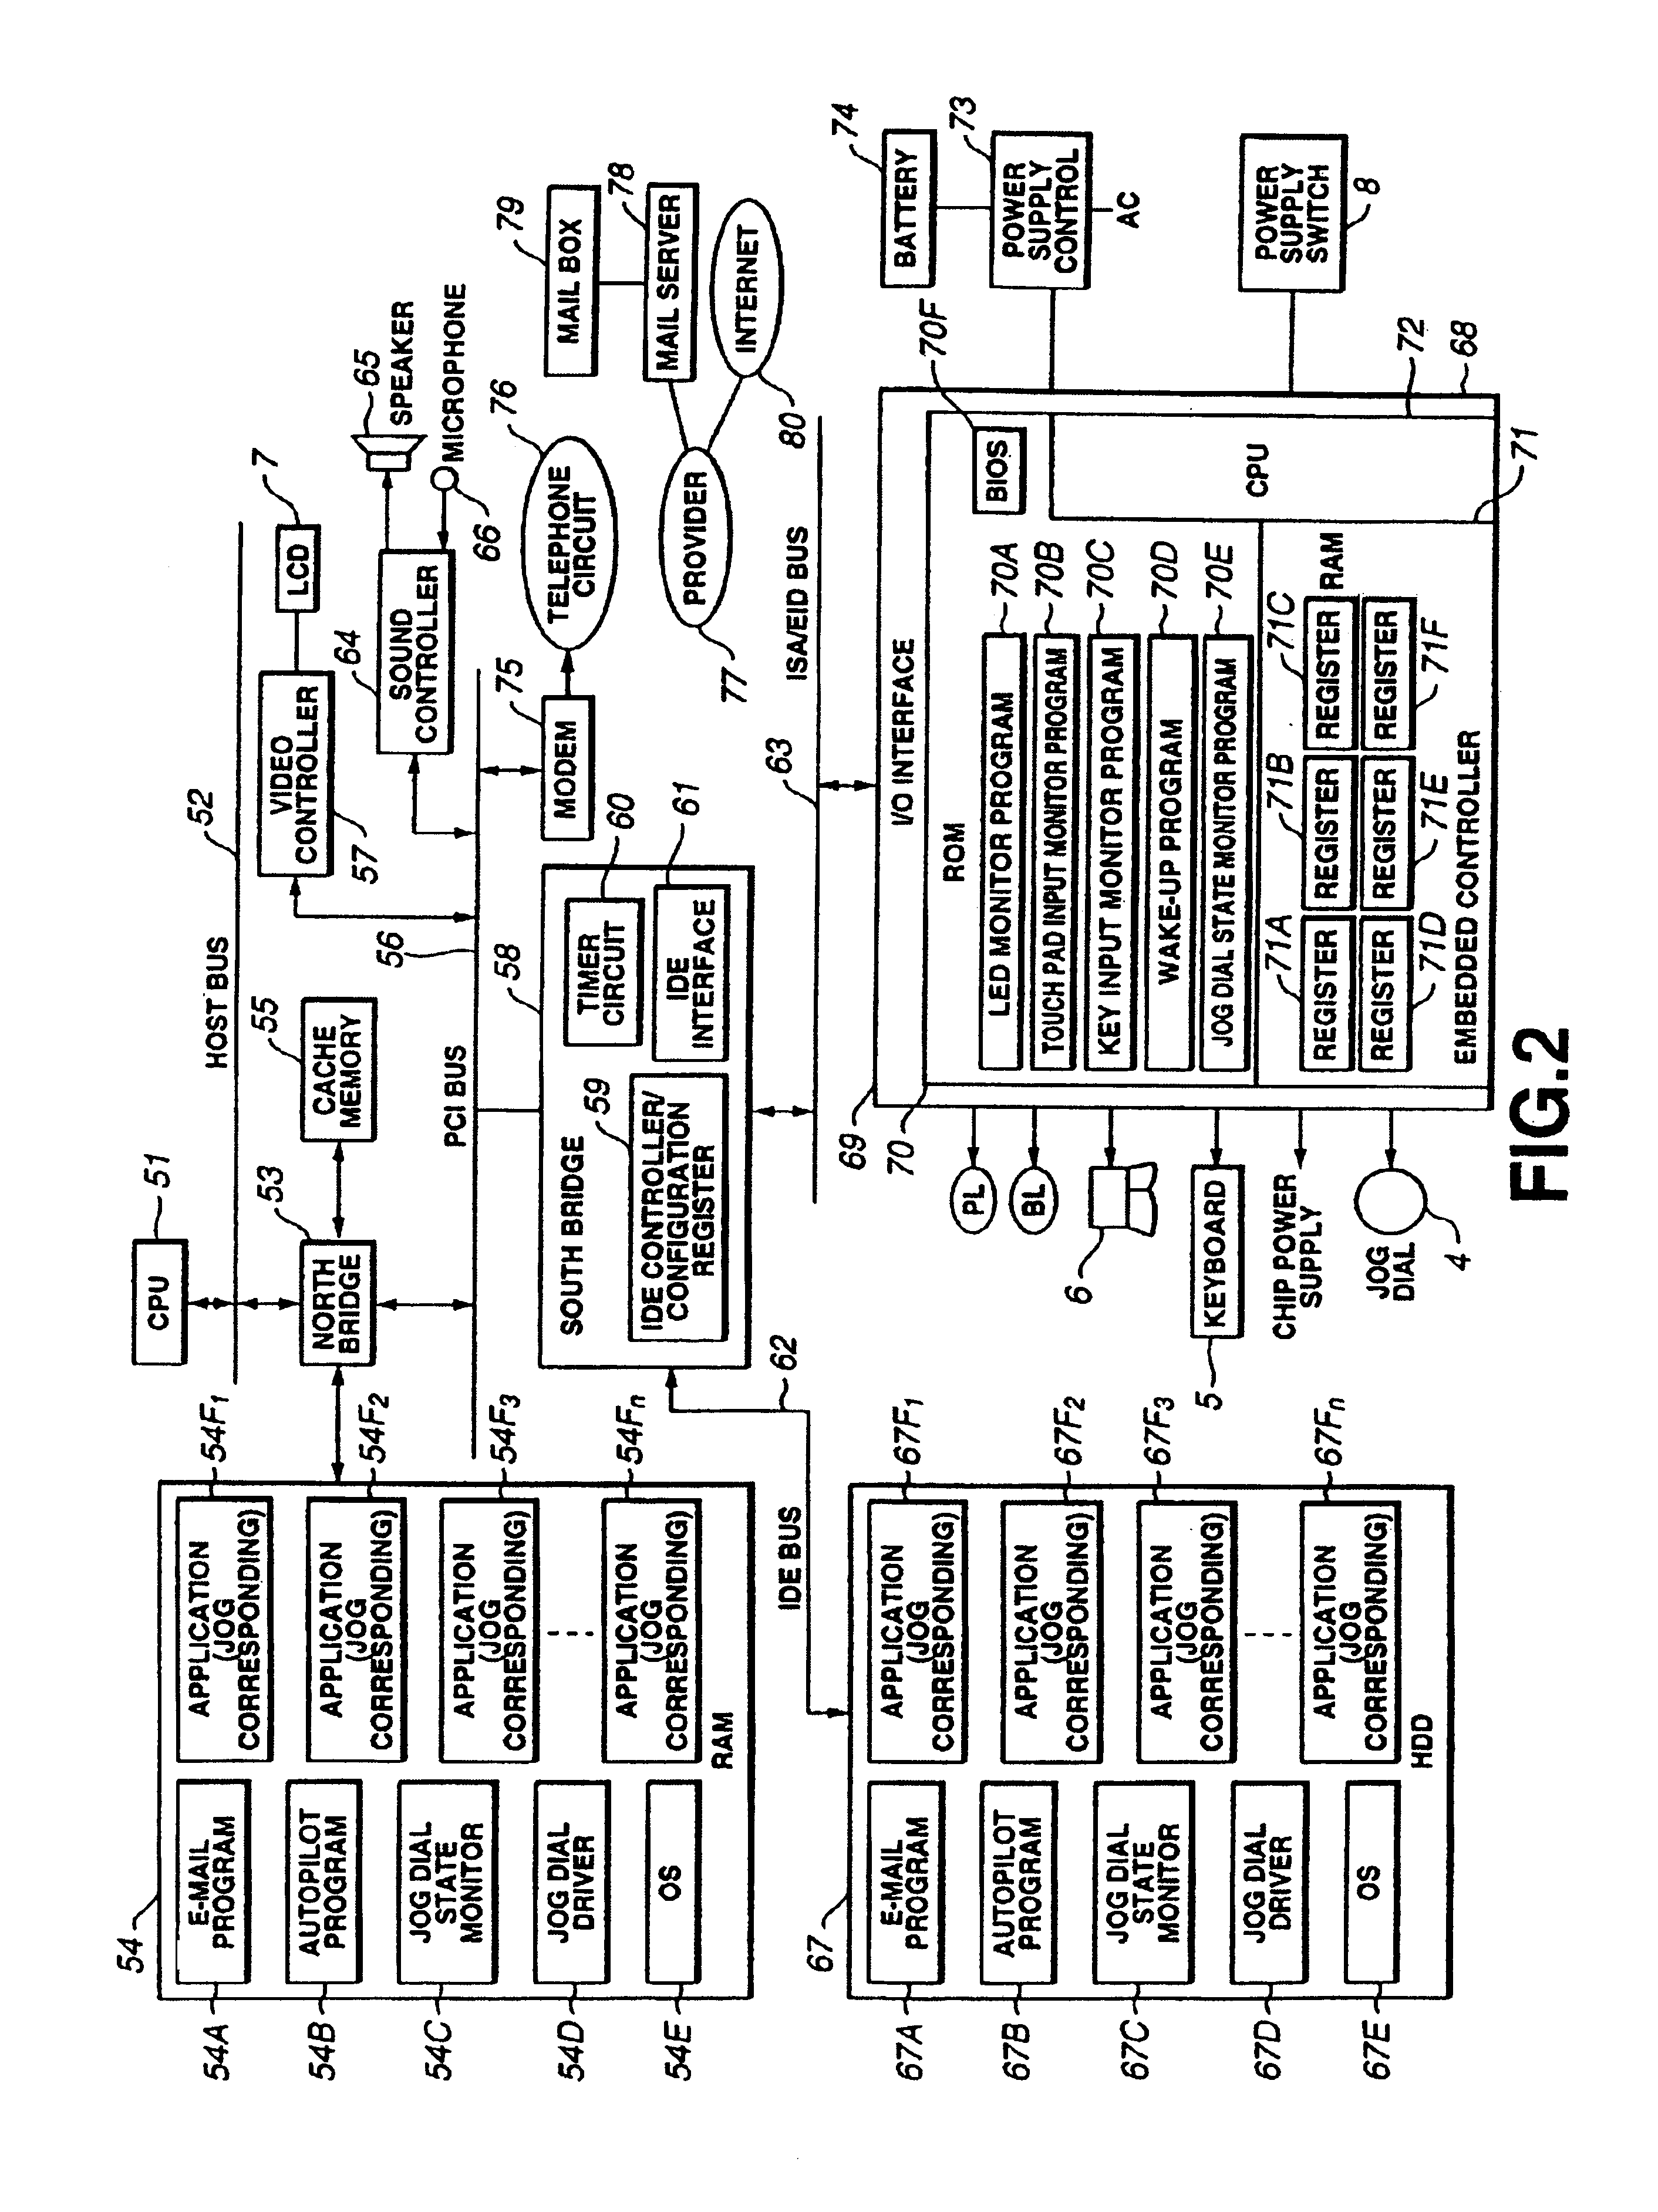 Method and apparatus for arranging and displaying files or folders in a three-dimensional body